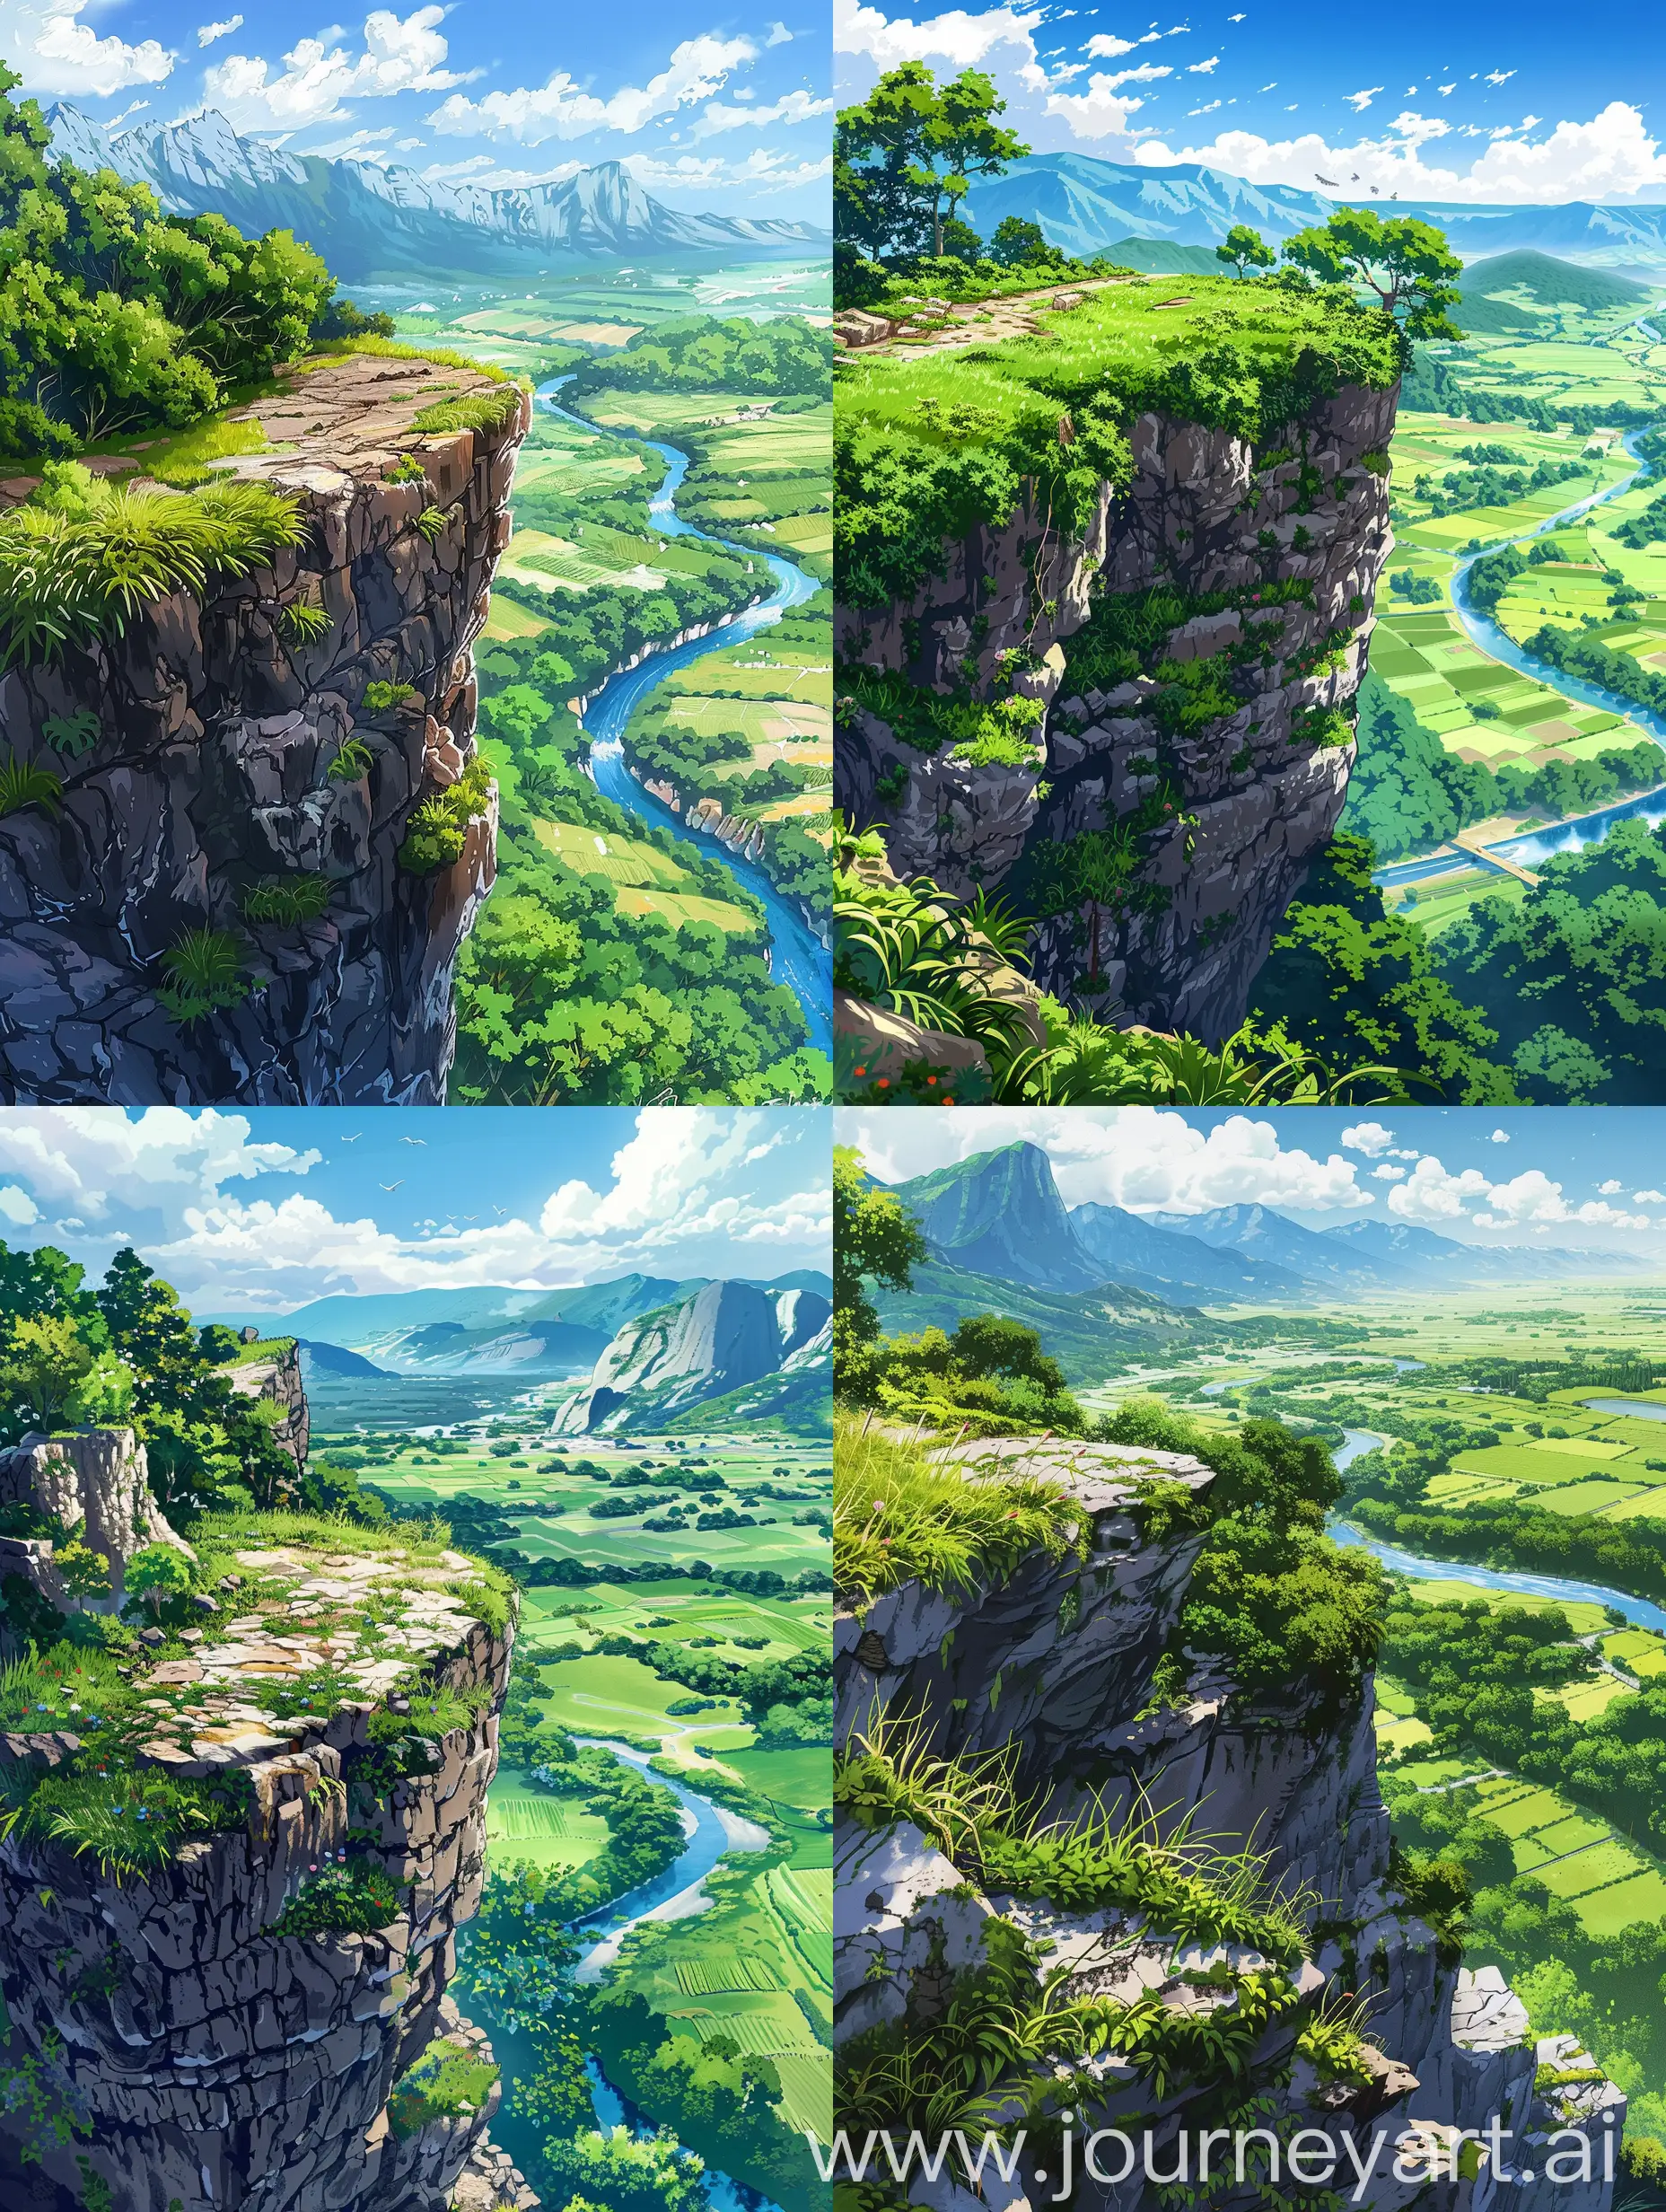 Studio Ghibli anime style, niji, vibrant and colorful painting, with soft lines and realistic details.  The image should convey a feeling of peace, harmony and natural beauty.  The contrast between warm and cold colors should be balanced and pleasing to the eye.  Create an image of a stunning natural landscape seen from the top of a rocky cliff covered in grass and vegetation.  The cliff overlooks a lush green valley, where a winding river flows through fields and trees.  The mountains in the background are partially obscured by clouds, adding depth to the scene.  The sky is clear, with scattered white clouds, indicating a pleasant, sunny day.  The sunlight illuminates the valley, the trees, the green fields and the blue waters of the river, giving the image a peaceful and serene atmosphere.